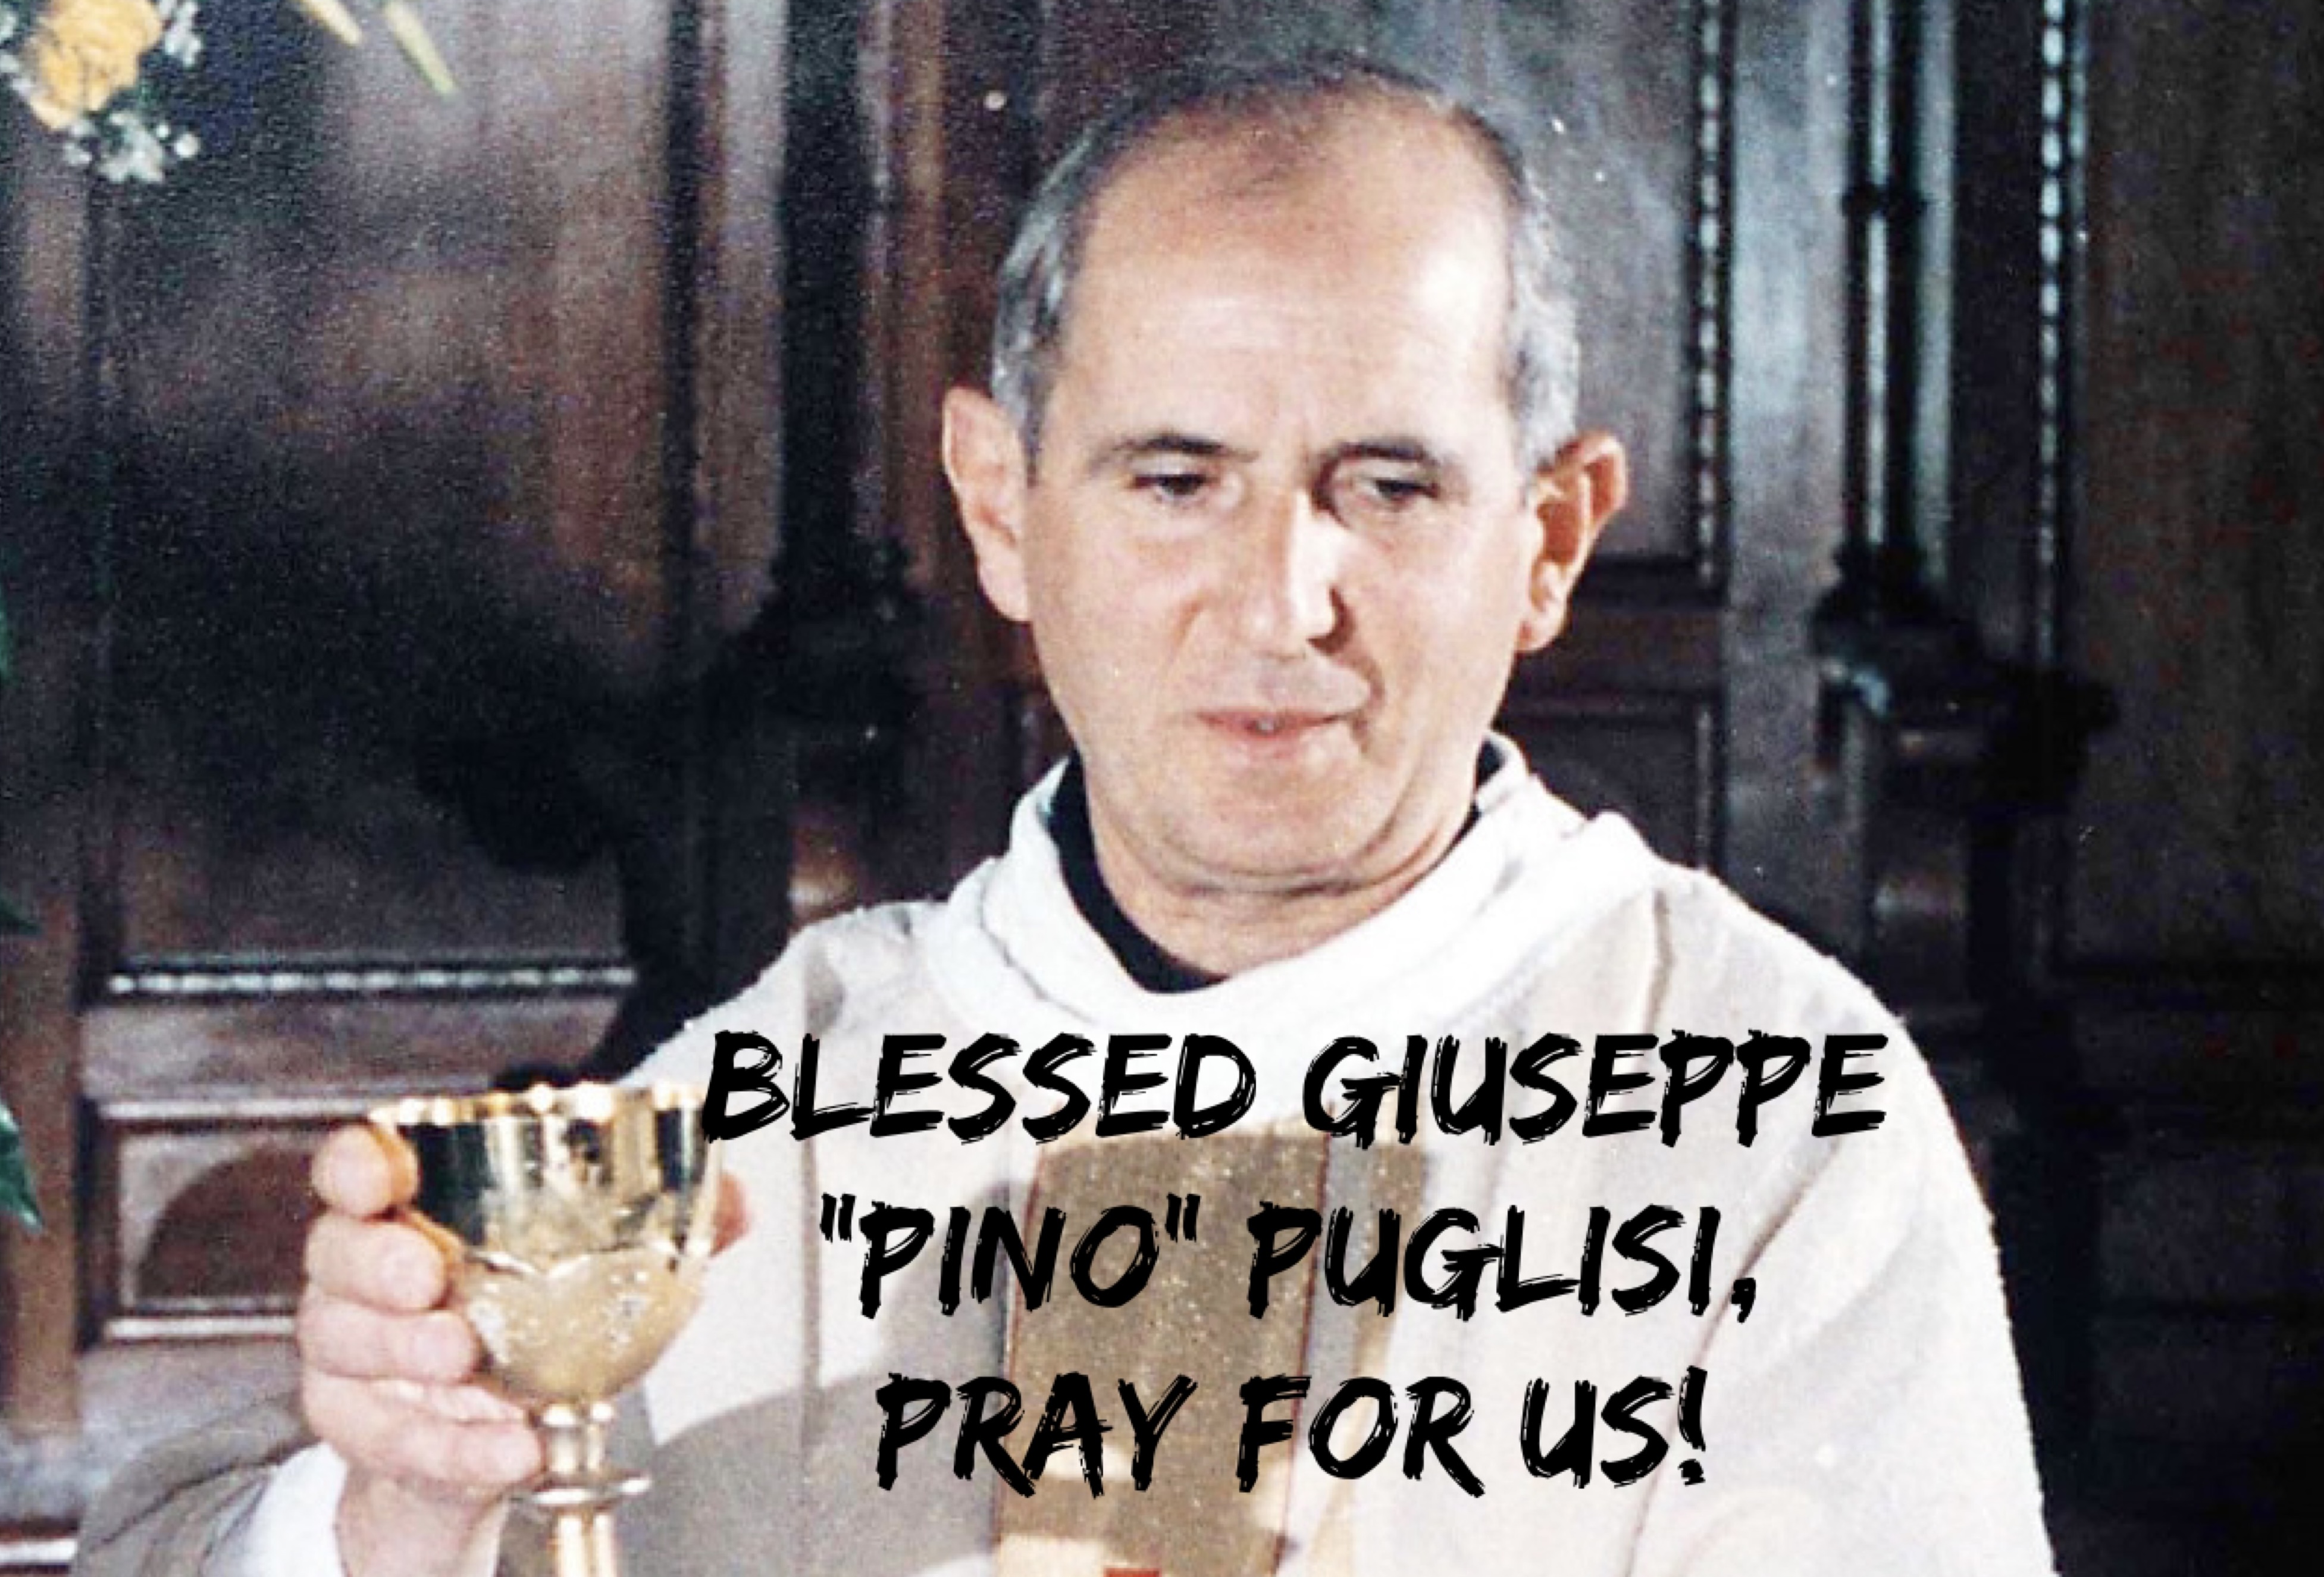 21st October – Blessed Giuseppe “Pino” Puglisi